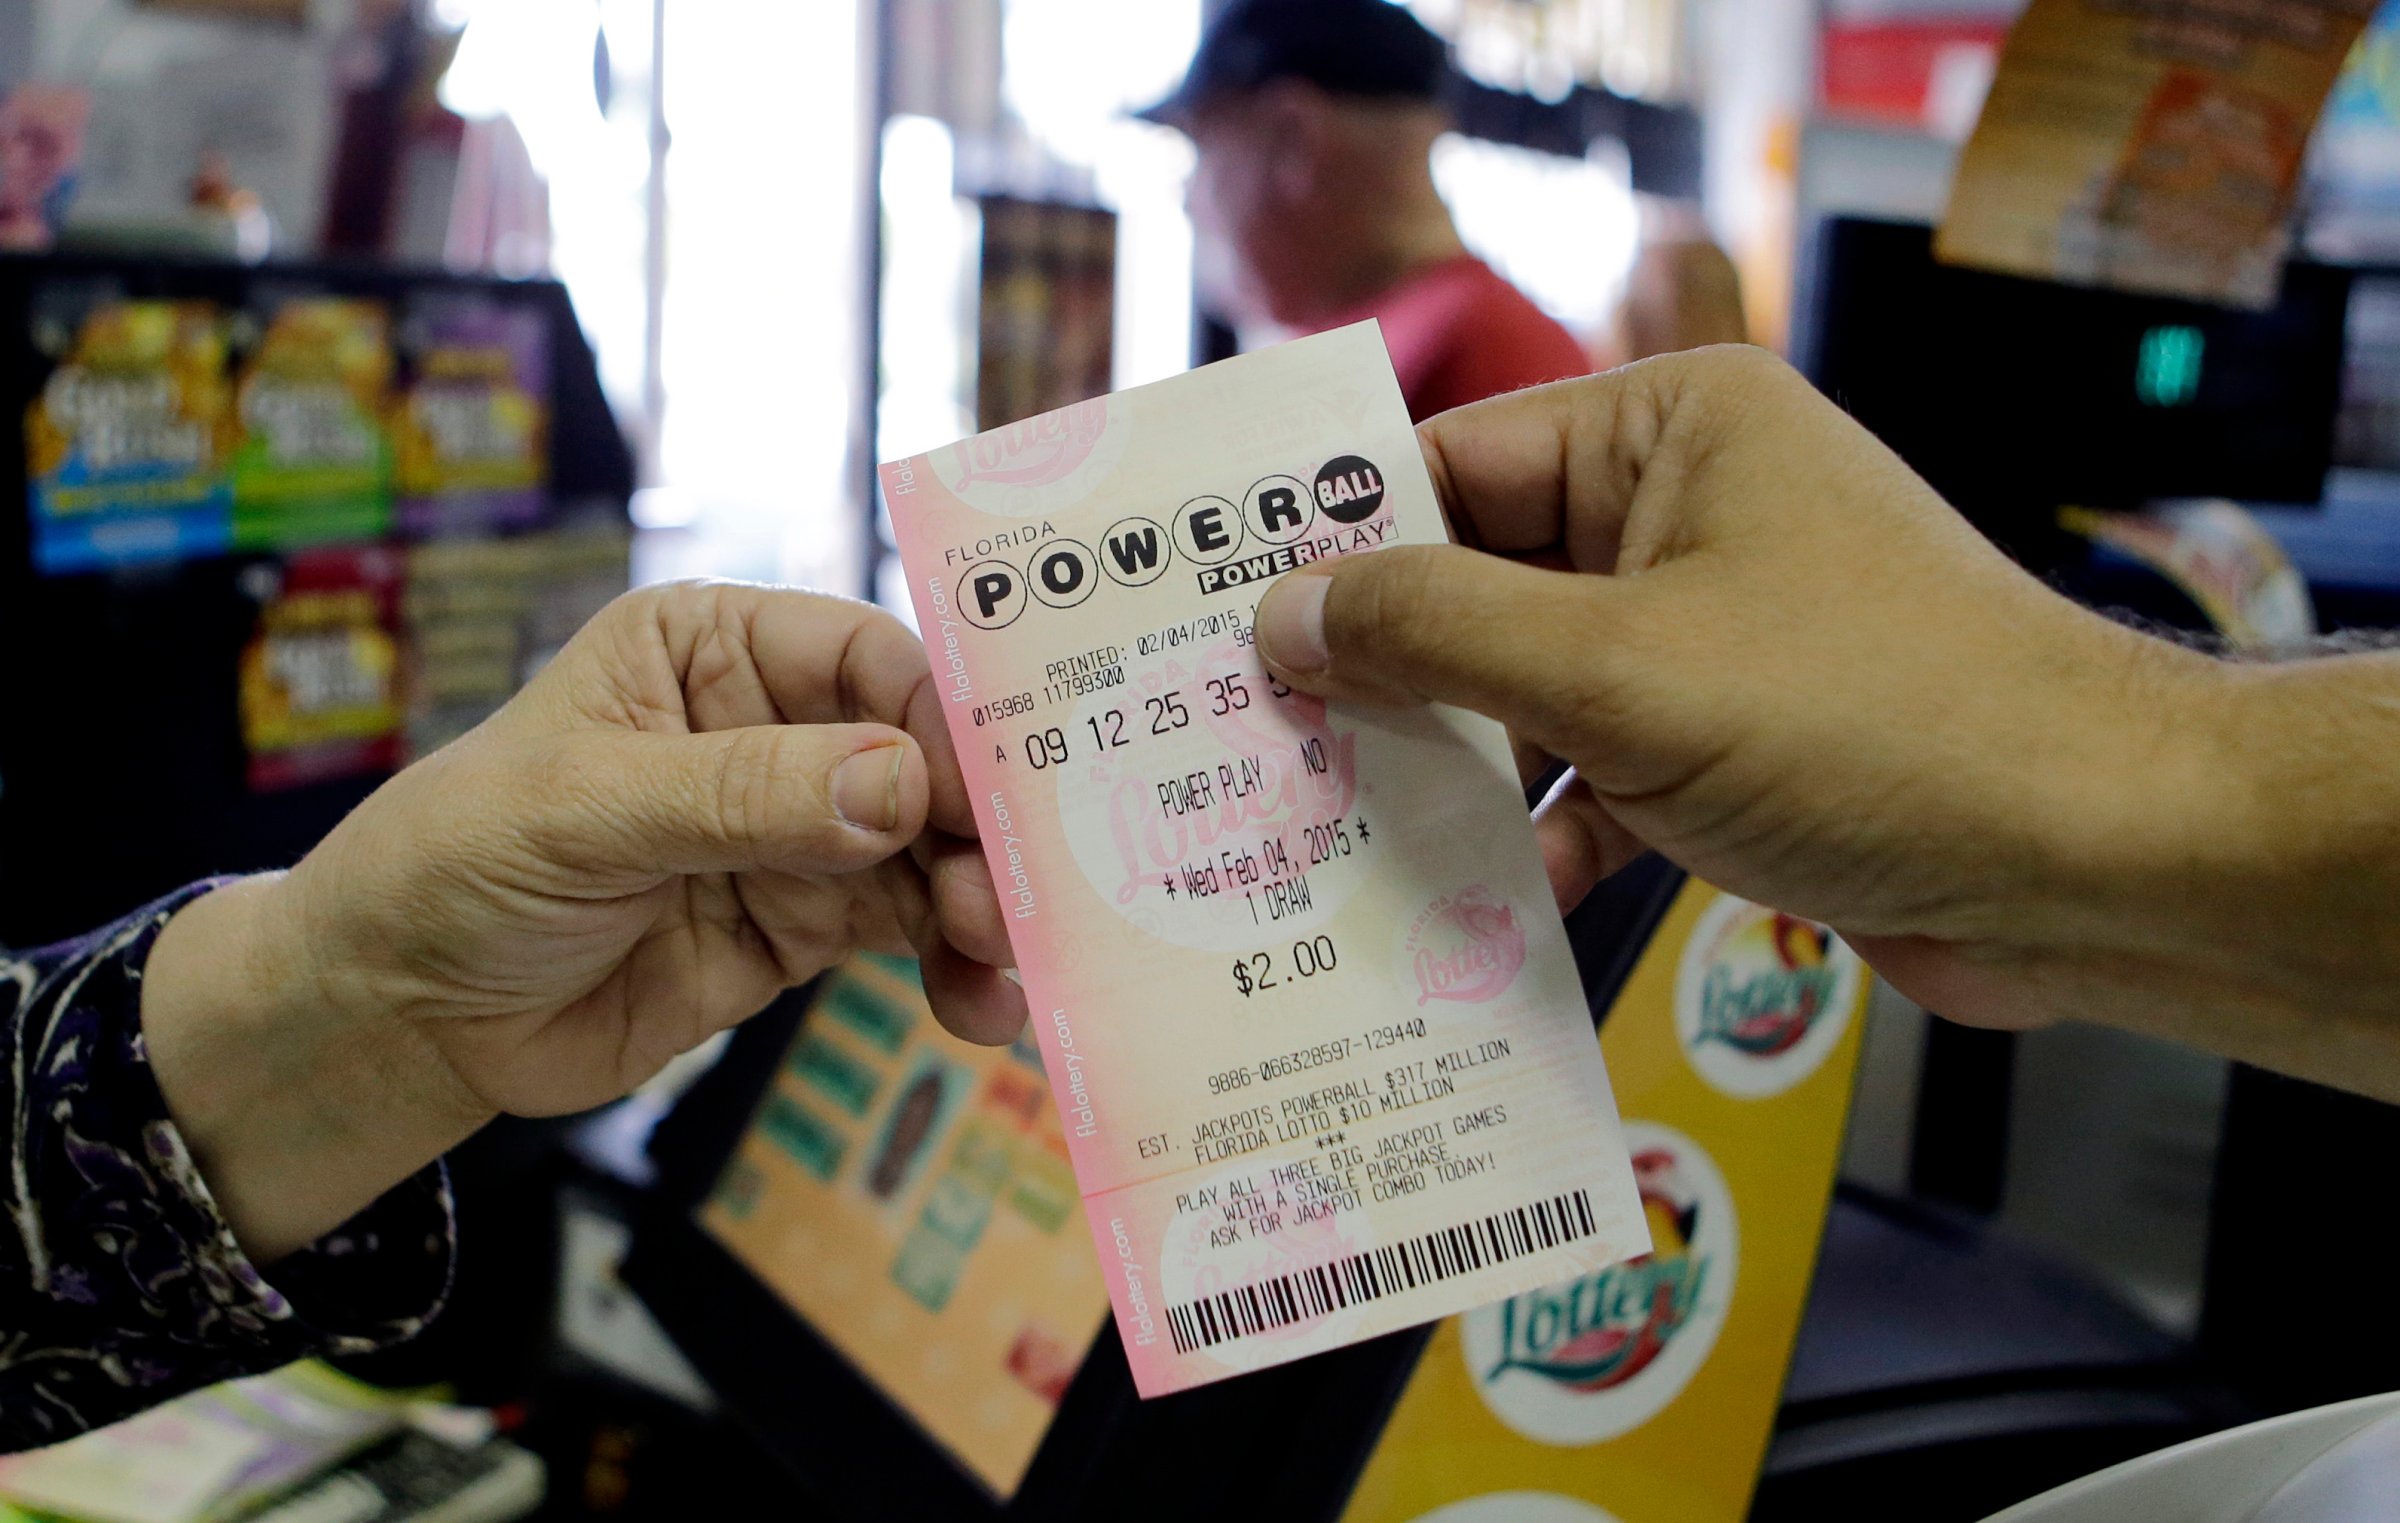 A store clerk hands a customer his Powerball ticket at a local grocery store in Hialeah, Fla., Wednesday, Feb. 4, 2015